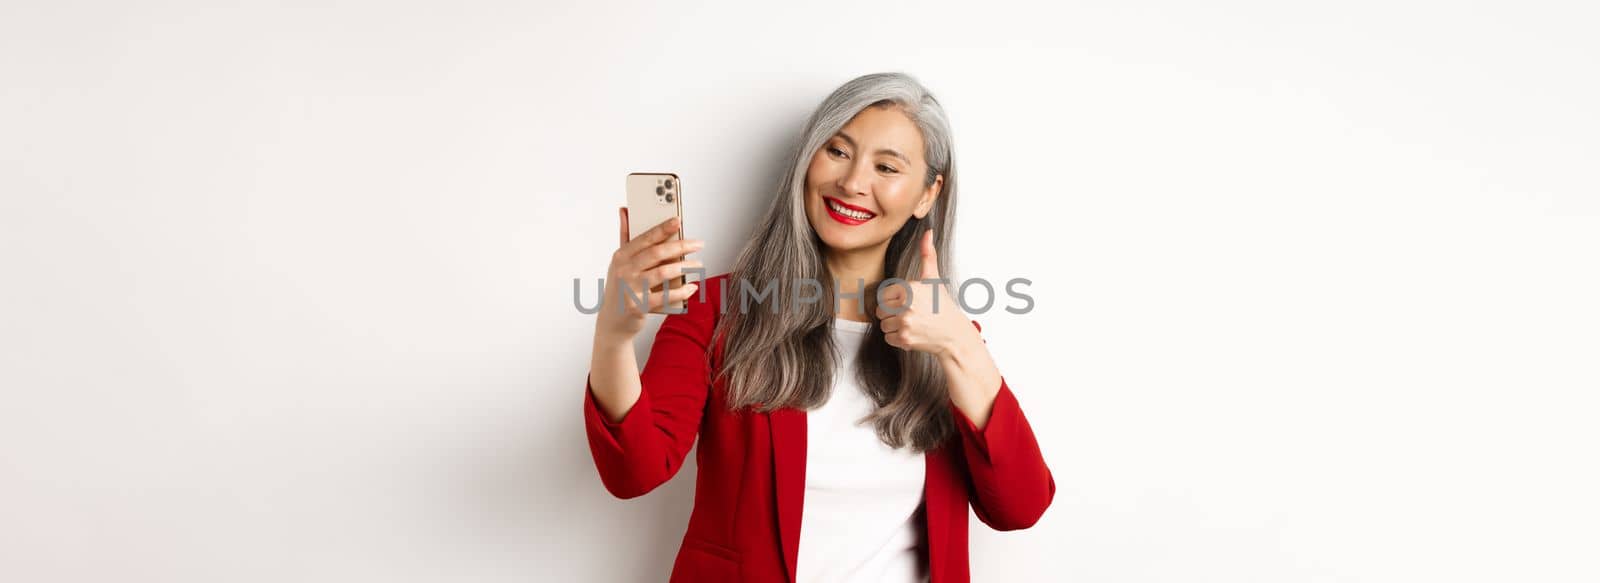 Successful asian businesswoman in red blazer, taking selfie on smartphone with thumb-up, showing approval, standing over white background.